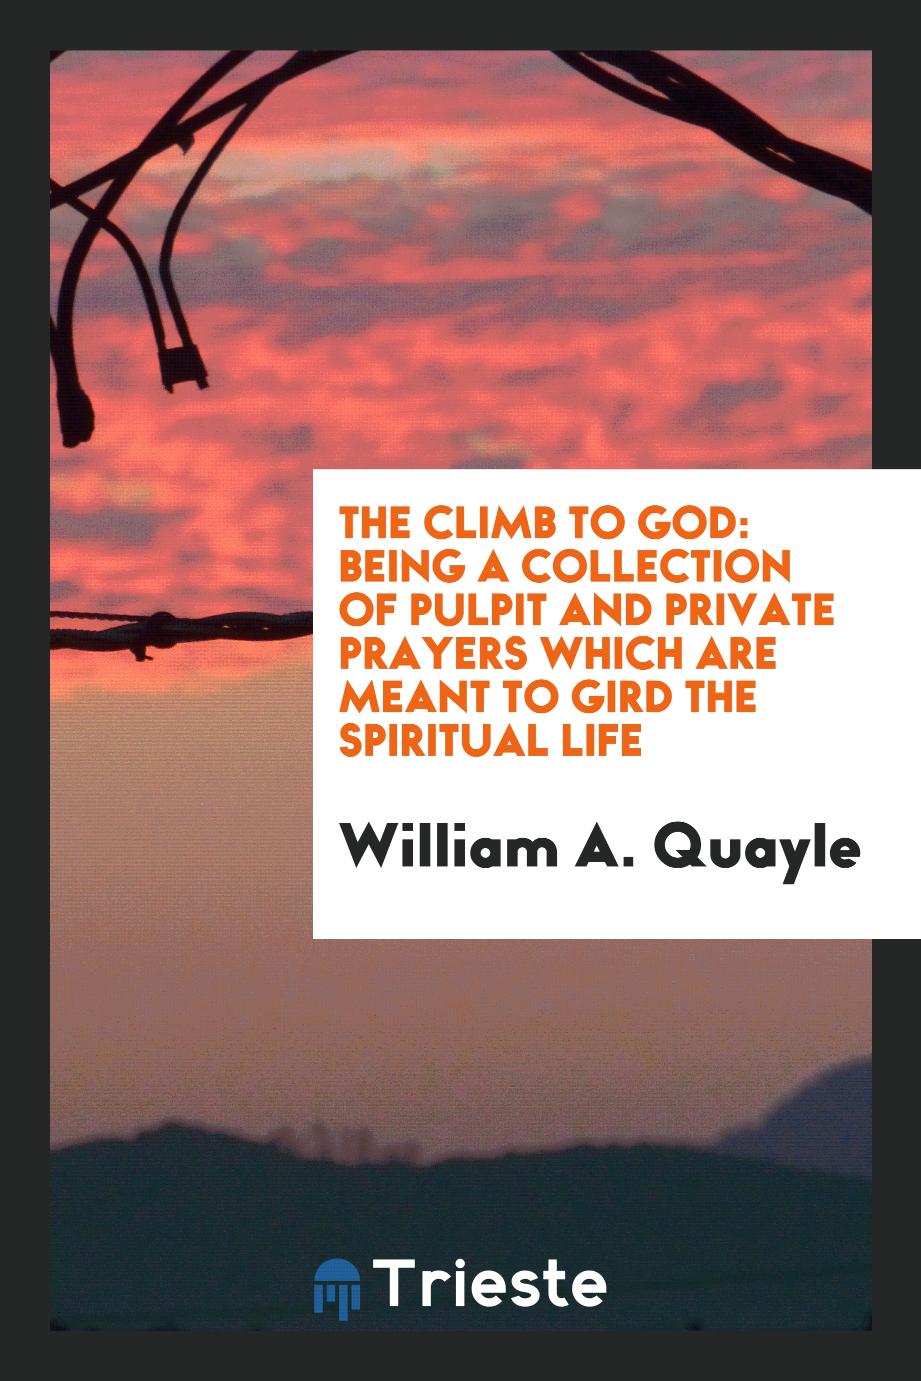 The climb to God: being a collection of pulpit and private prayers which are meant to gird the spiritual life